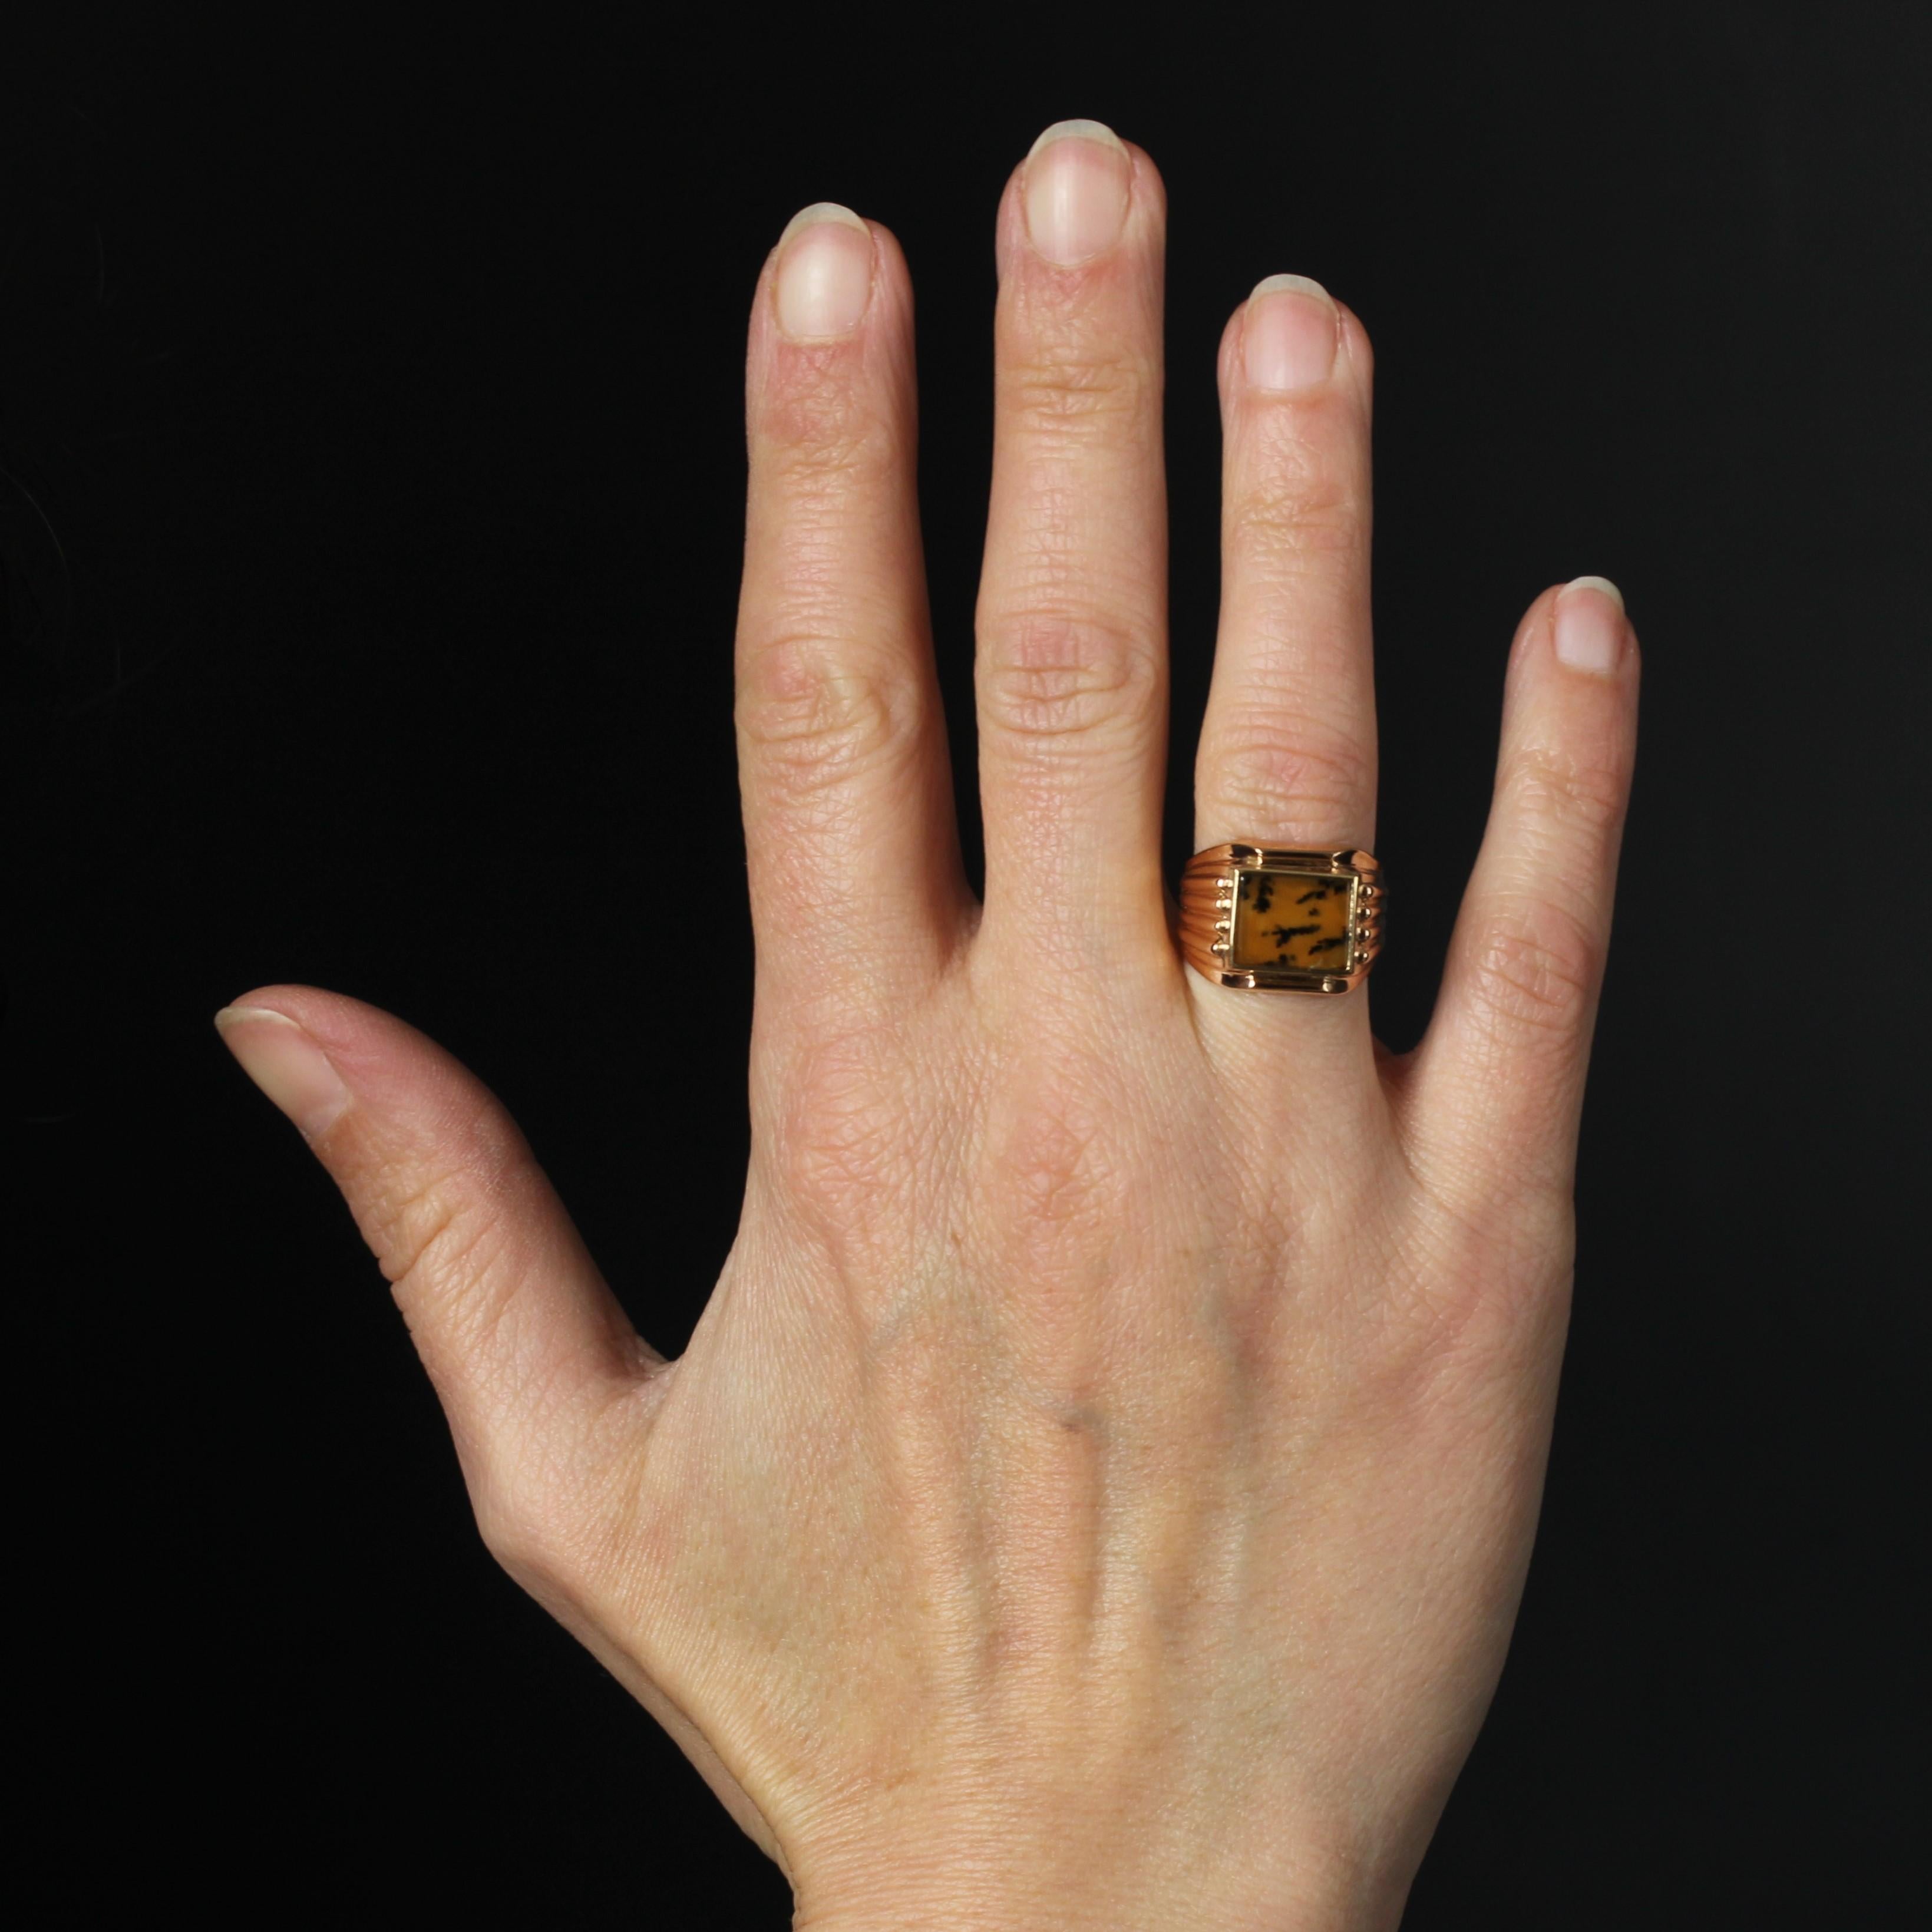 Ring in 18 karat rose gold, eagle head hallmark.
Antique ladies' Signet ring set with a dendrite agate plaque on the top. The start of the ring is gadrooned on both sides.
Height : 13 mm approximately, width : 11 mm approximately, thickness : 4.2 mm